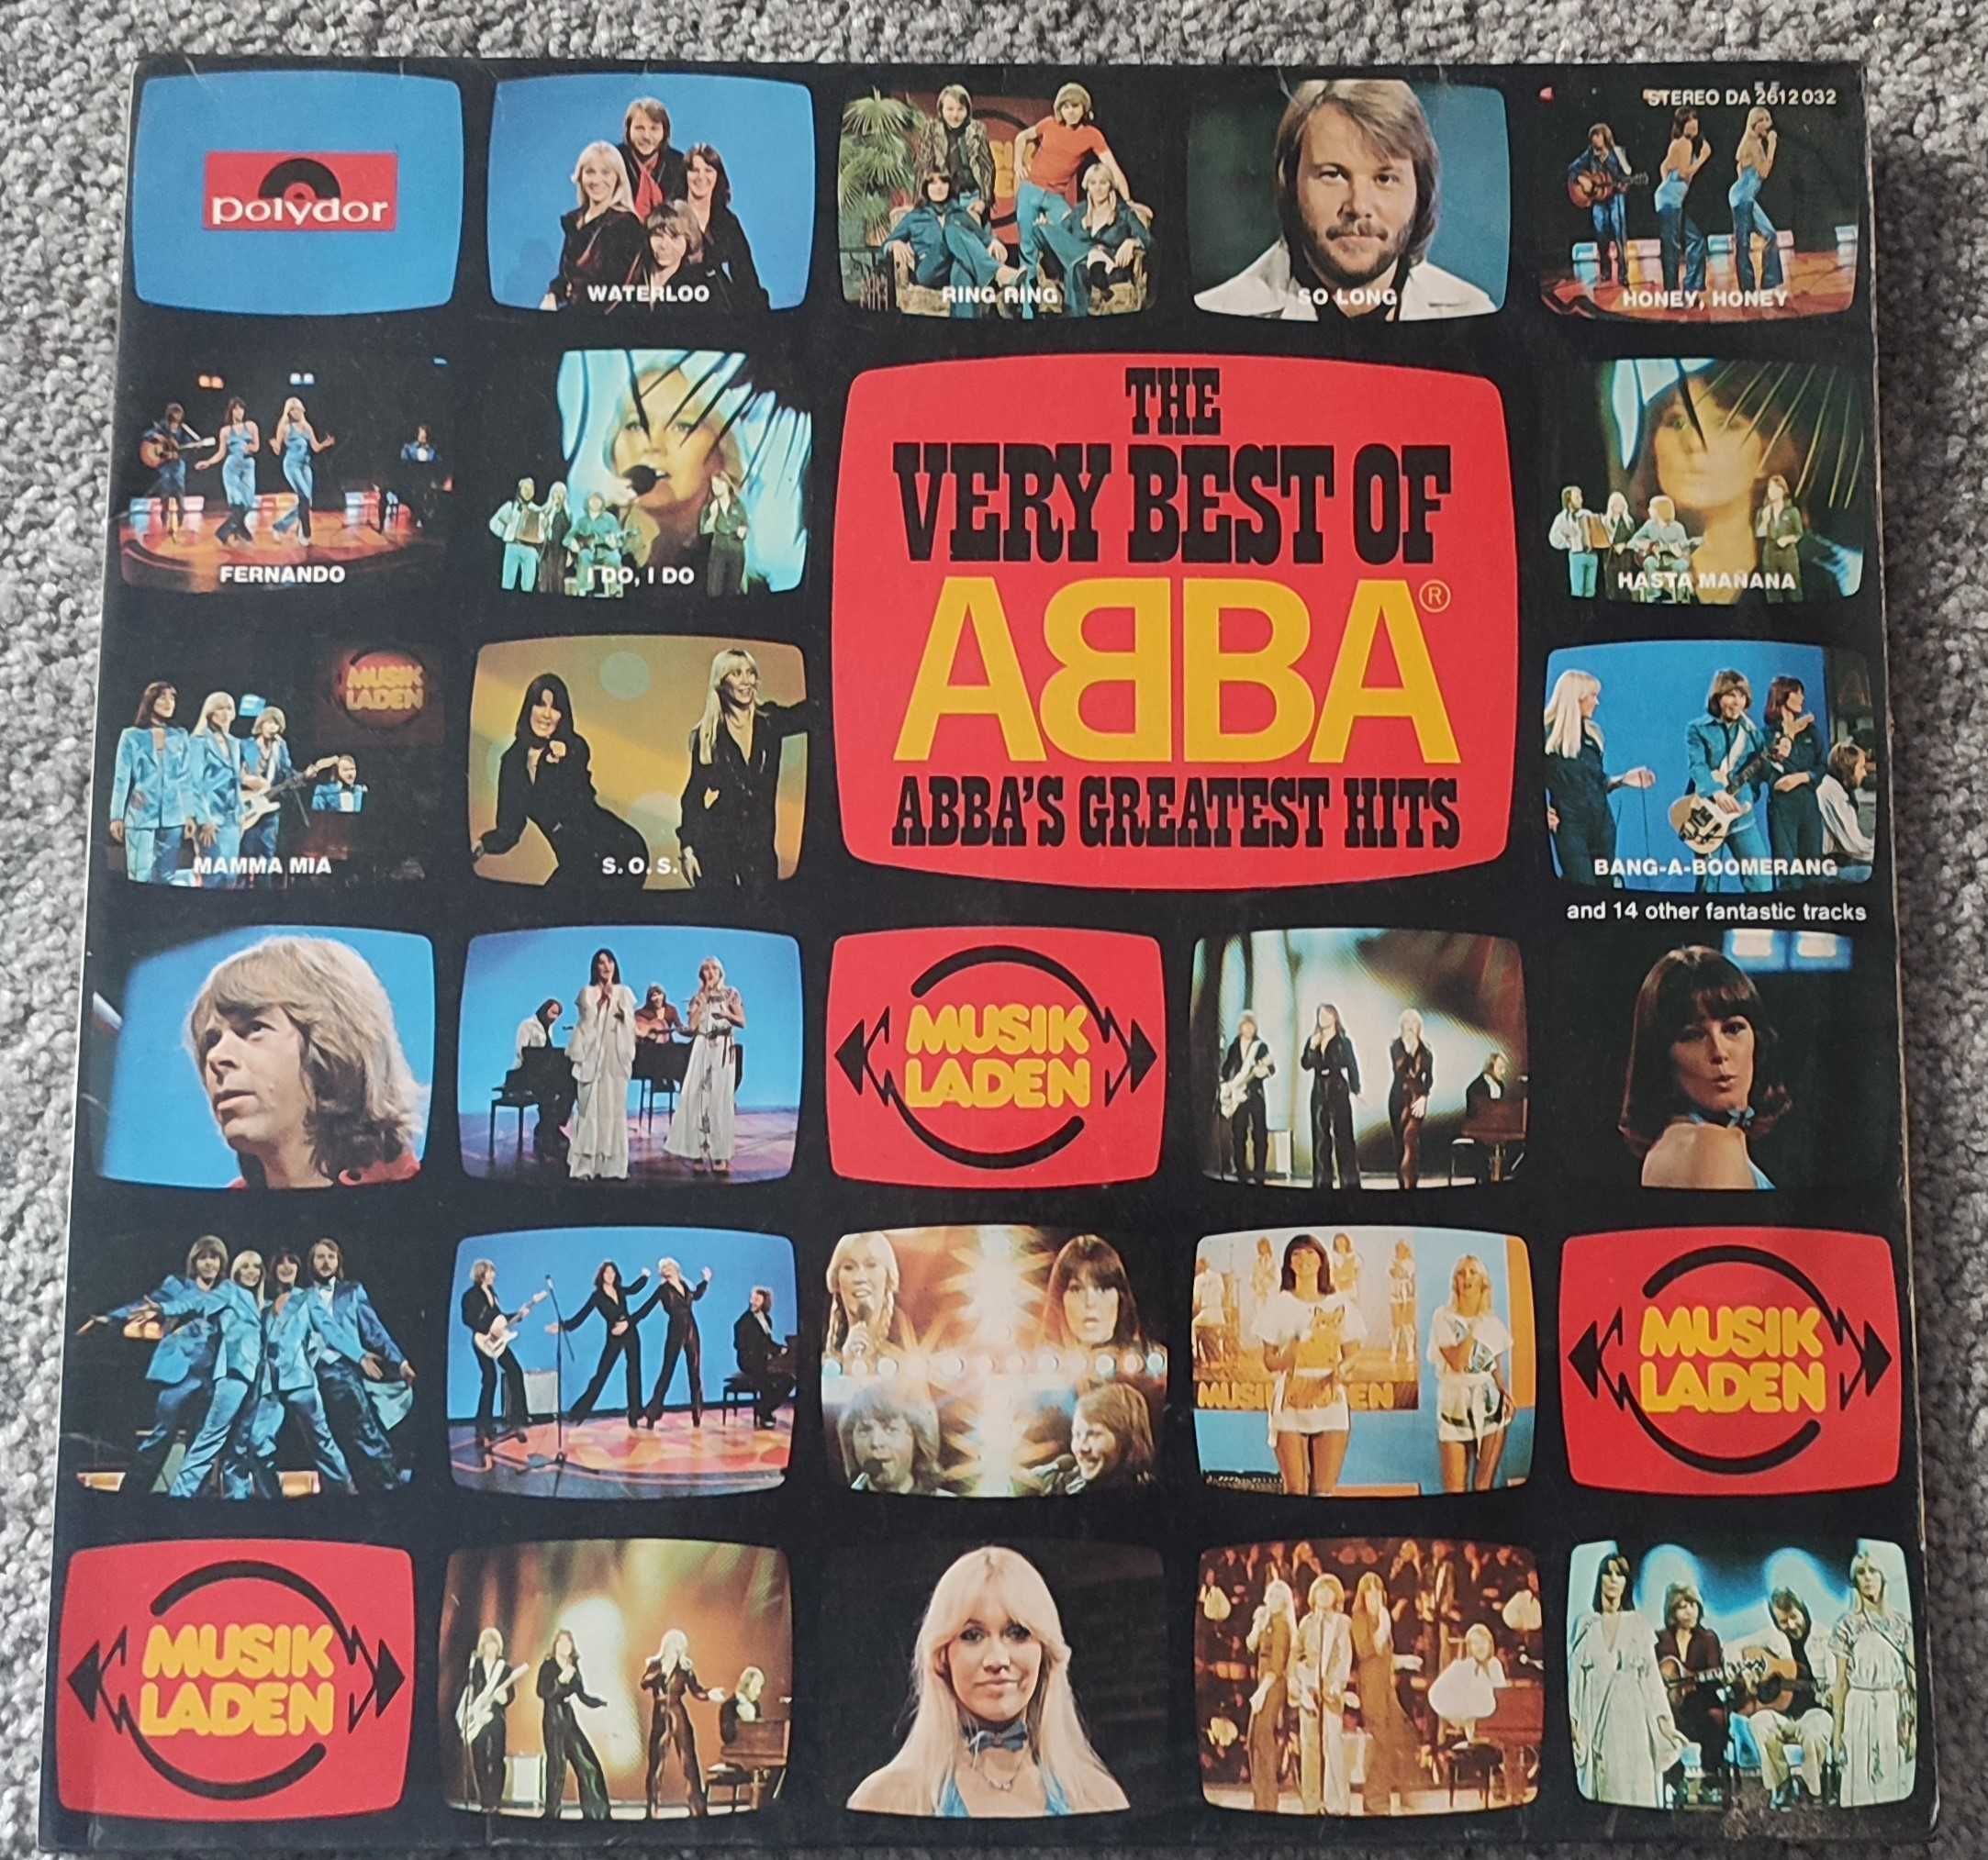 ABBA - The Very Best of ABBA (ABBA'S Greatest Hits) - 2 LP Vinil